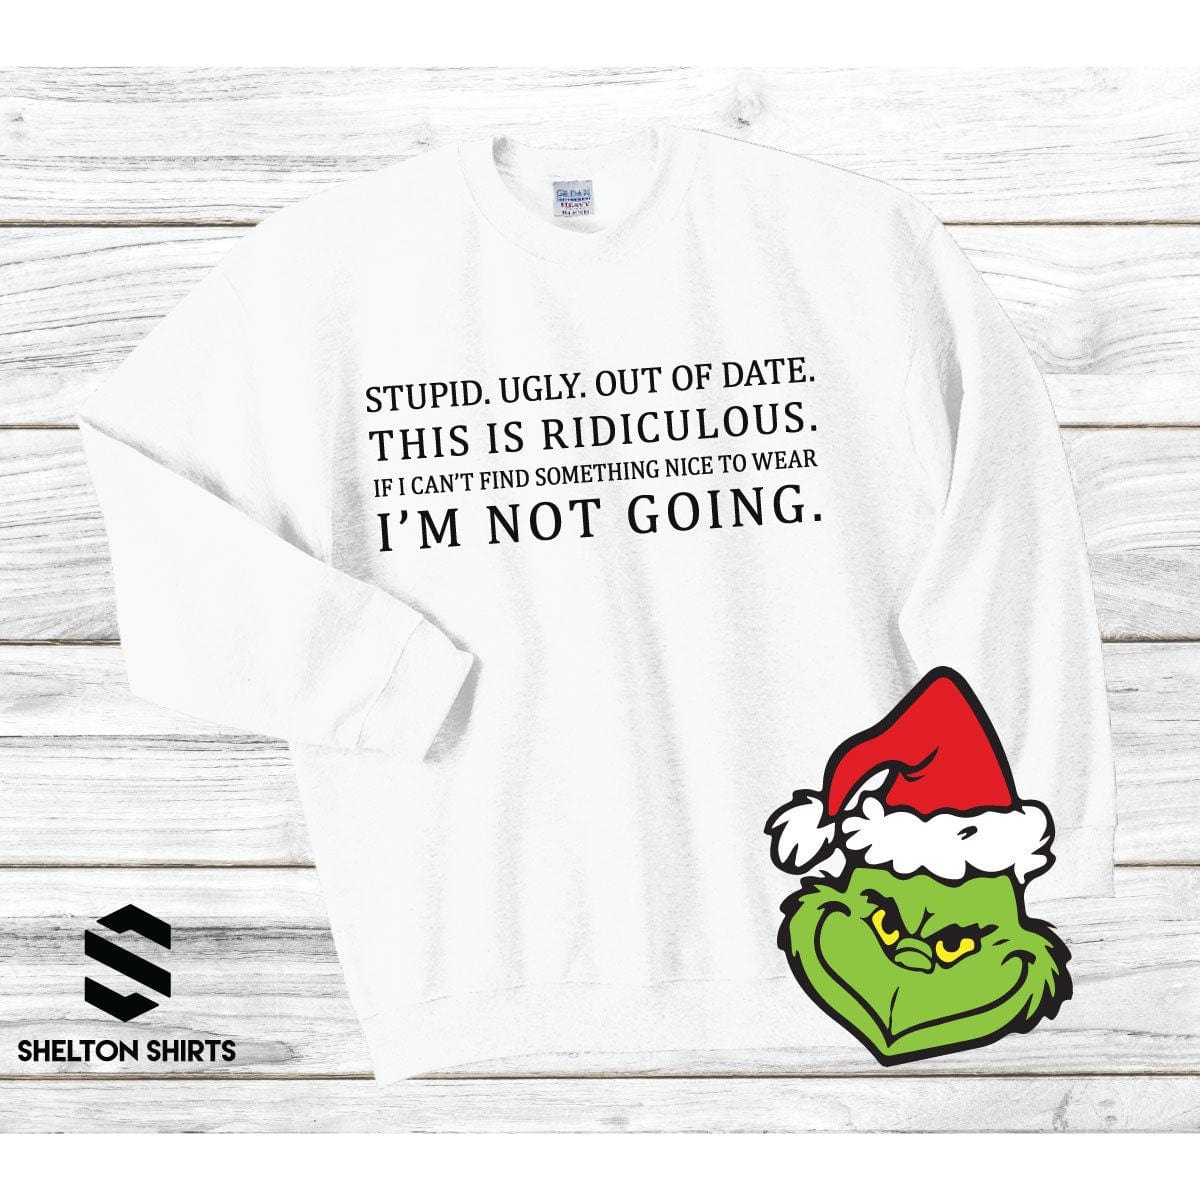 Stupid. Ugly. Out of date. If I can’t find something nice to wear. I’m not going Grinch Sweatshirt Shelton Shirts